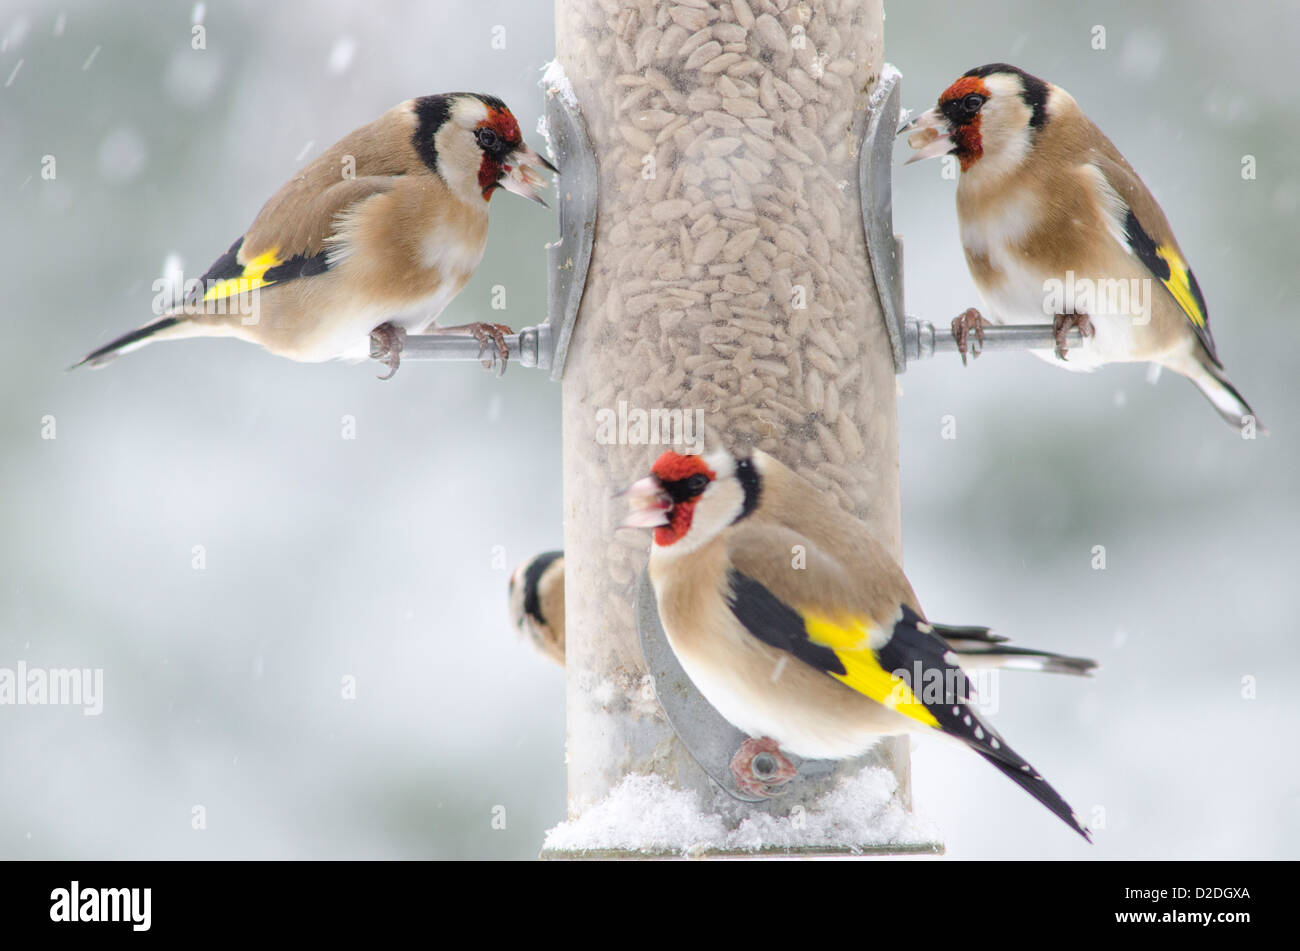 European Goldfinch [Carduelis carduelis] on bird feeder filled with sunflower hearts. Snowing. January. West Sussex, UK Stock Photo